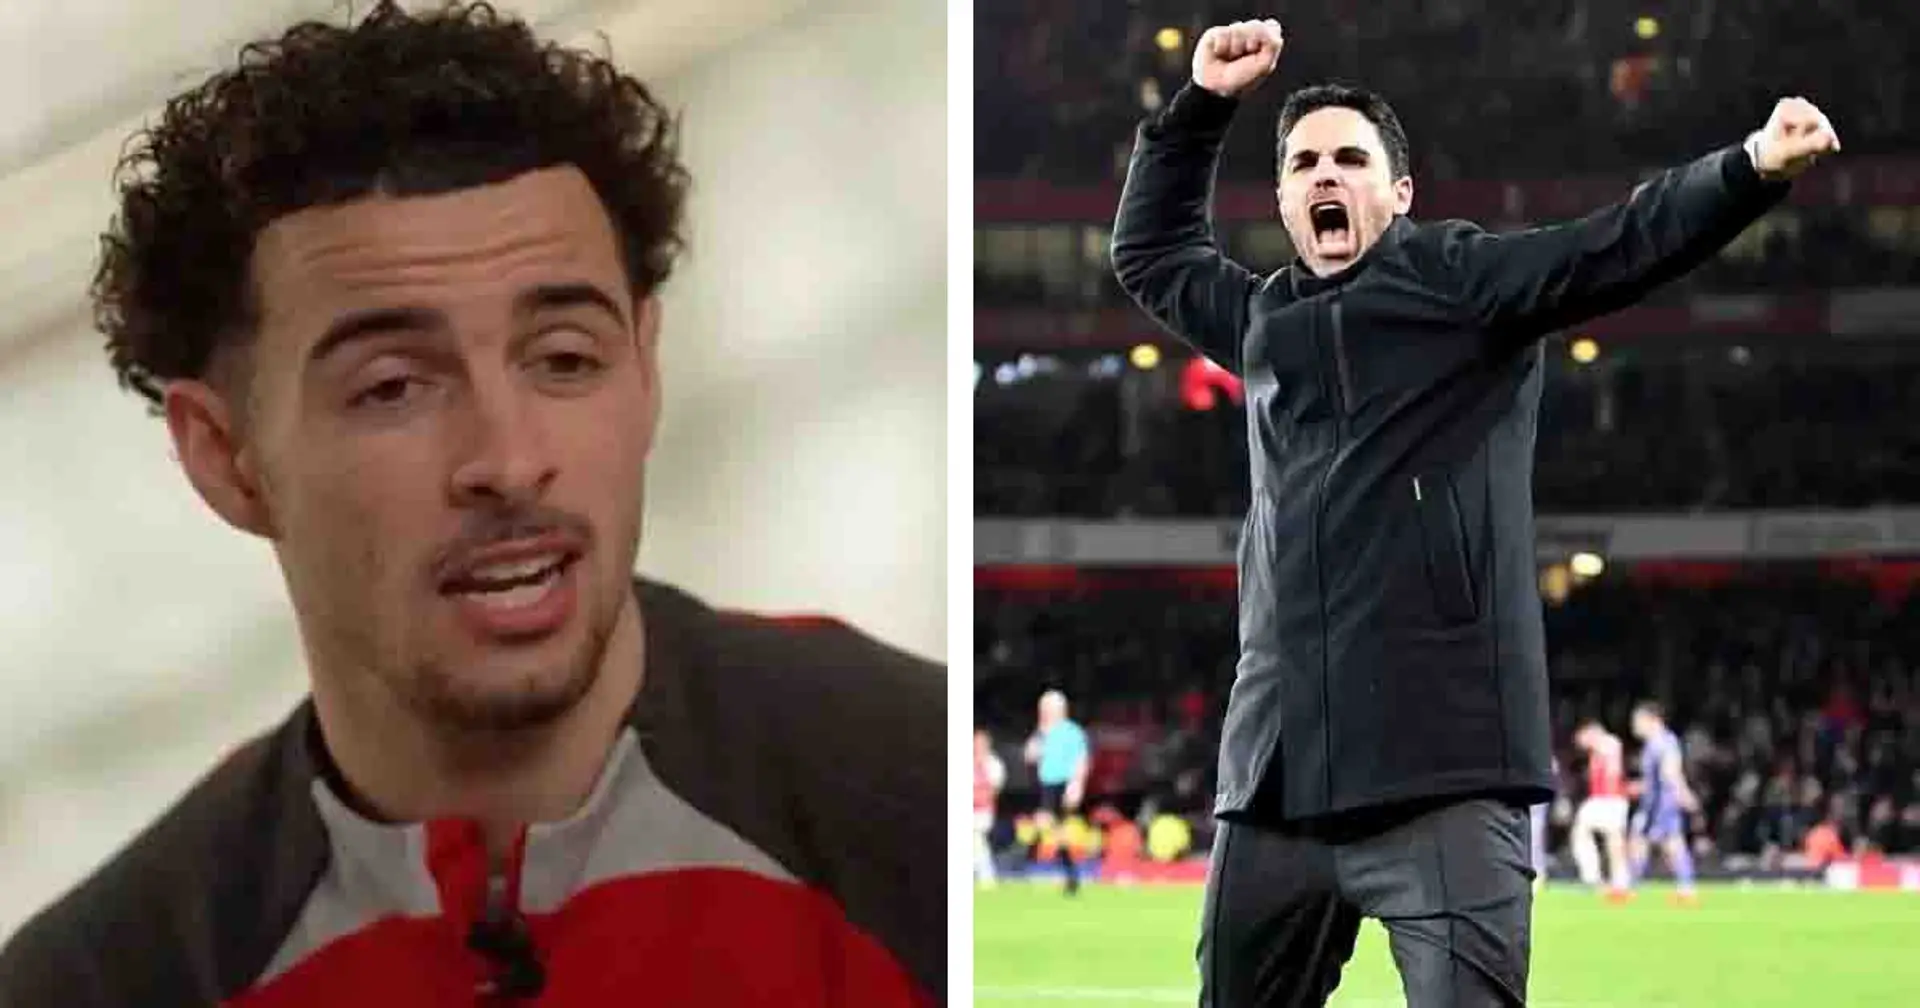 'They're copying us': Curtis Jones takes dig at Arsenal's over-the-top celebrations after Liverpool win